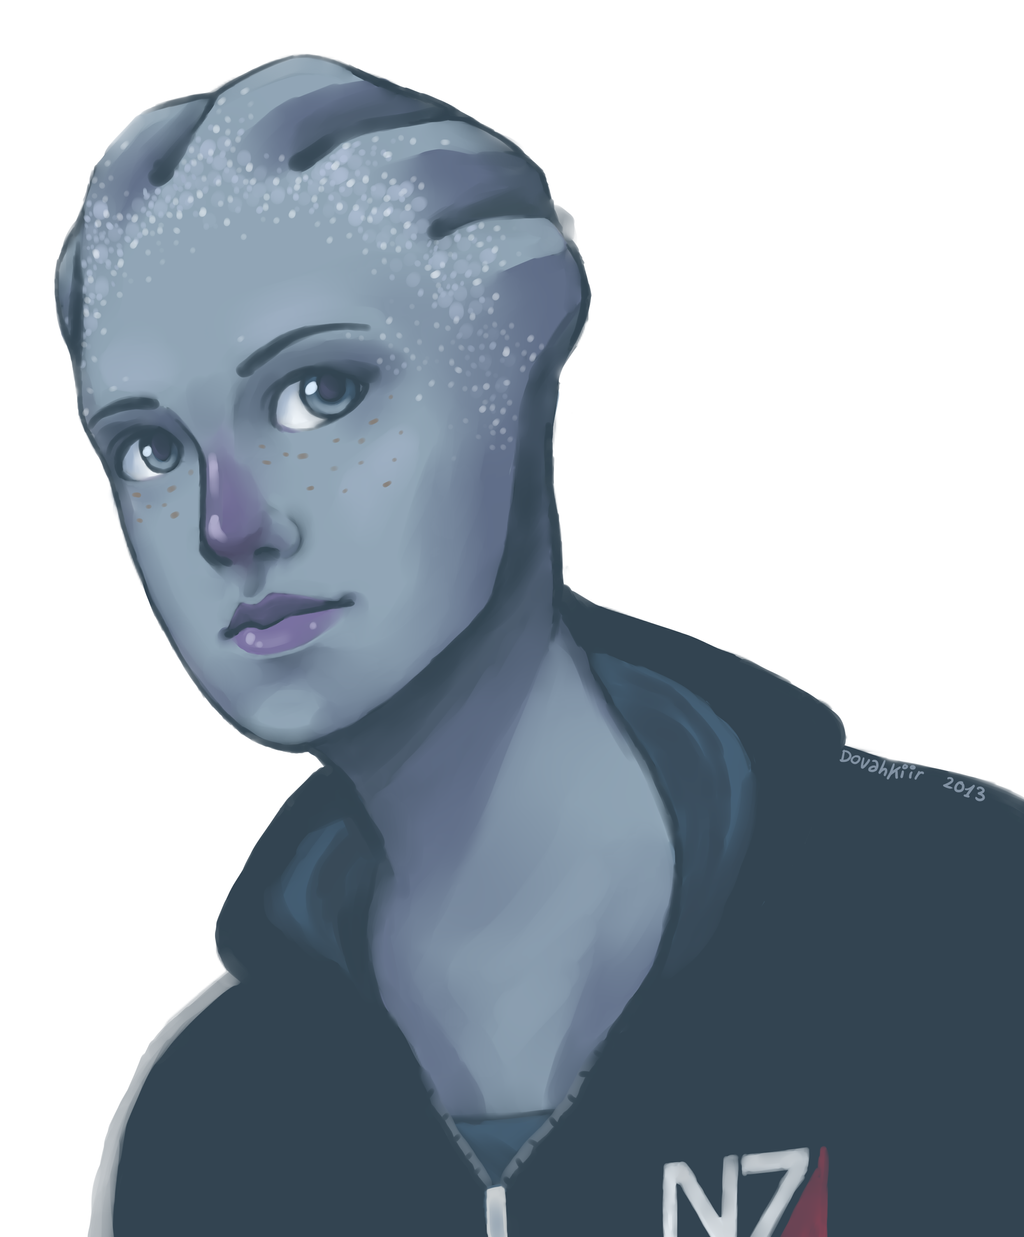 liara_t_soni_by_dovahkiir-d67ovhe.png